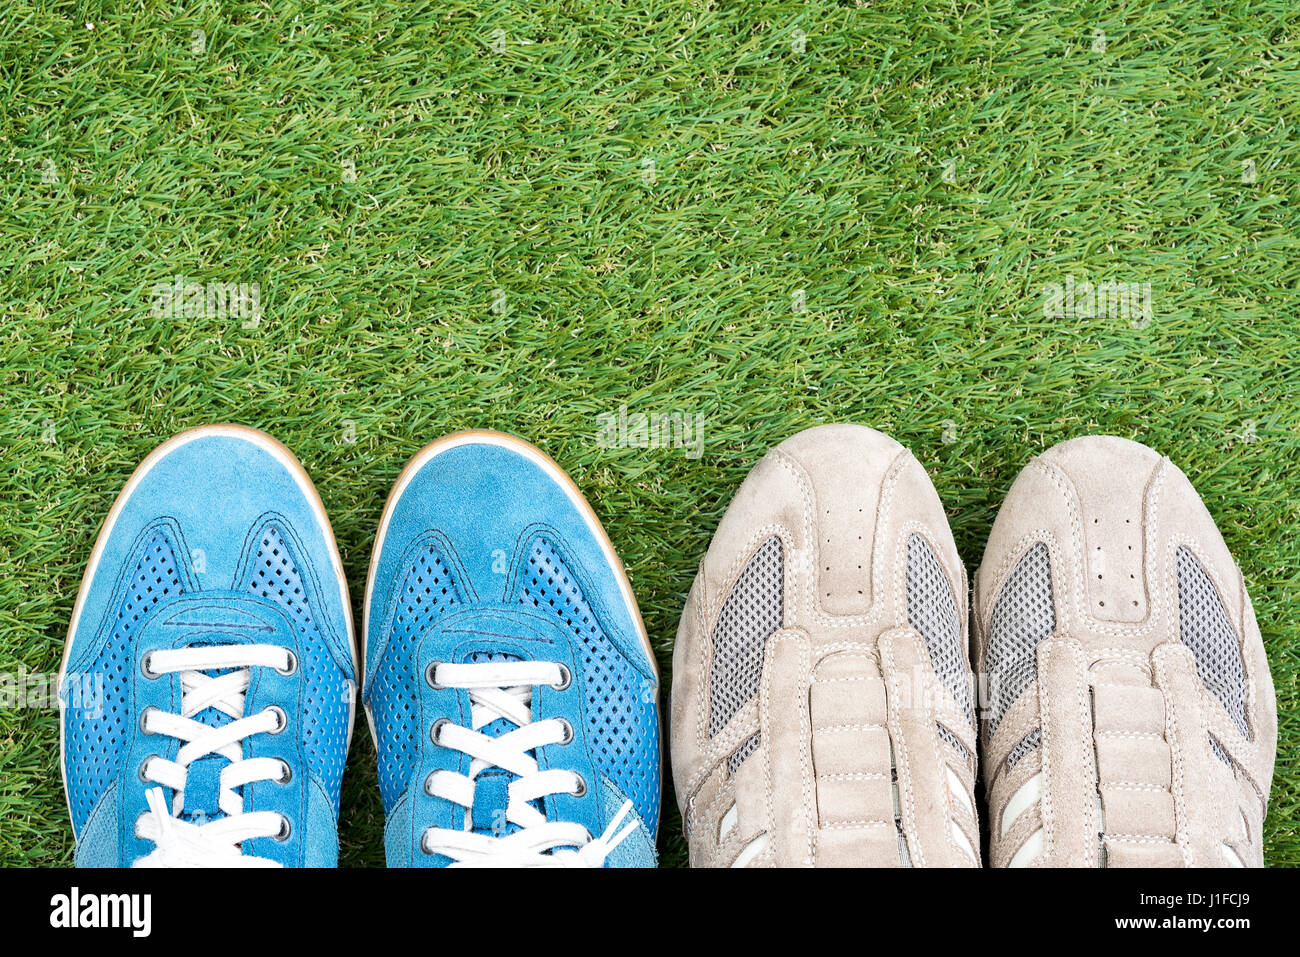 two sneaker leather shoes over green grass field, keep walking concept Stock Photo